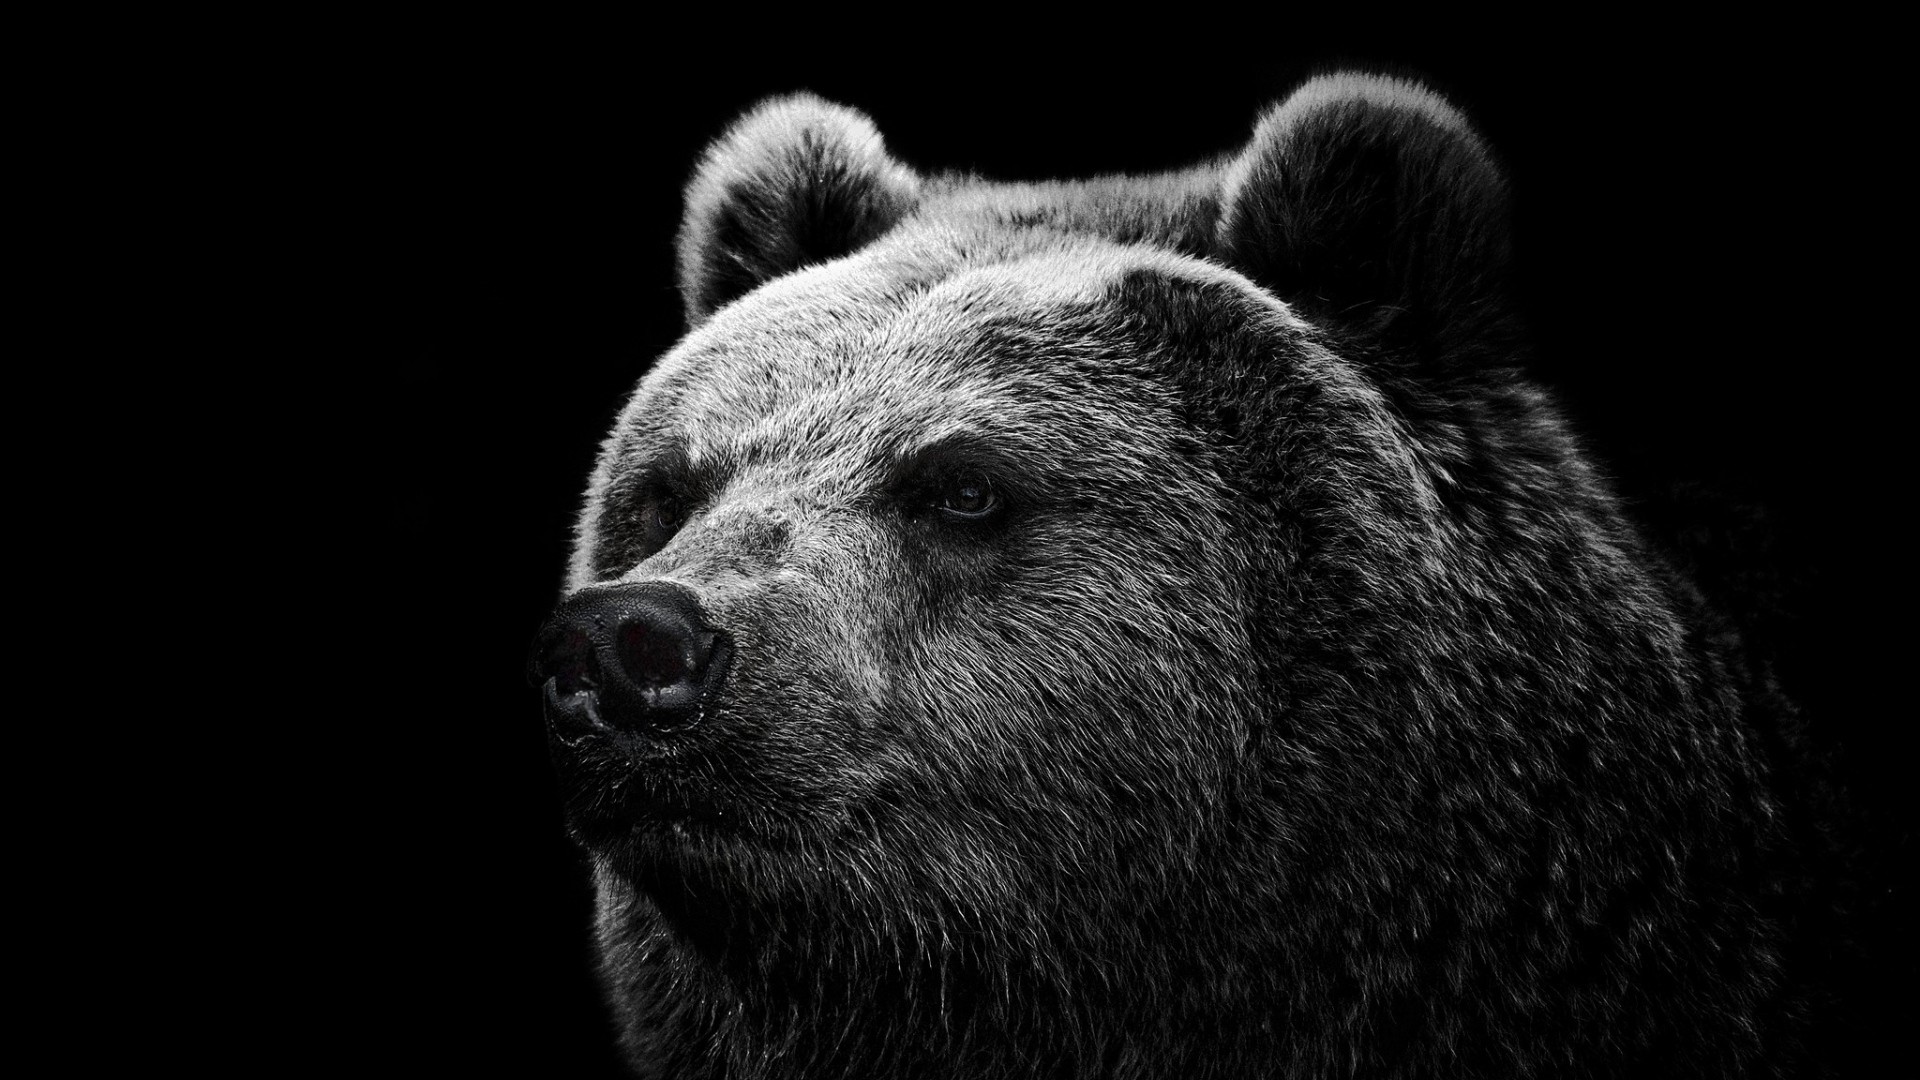 Attractive Bear Grizzly Bear Eyes Nose Download Hd Wallpaper Image Wallpaper